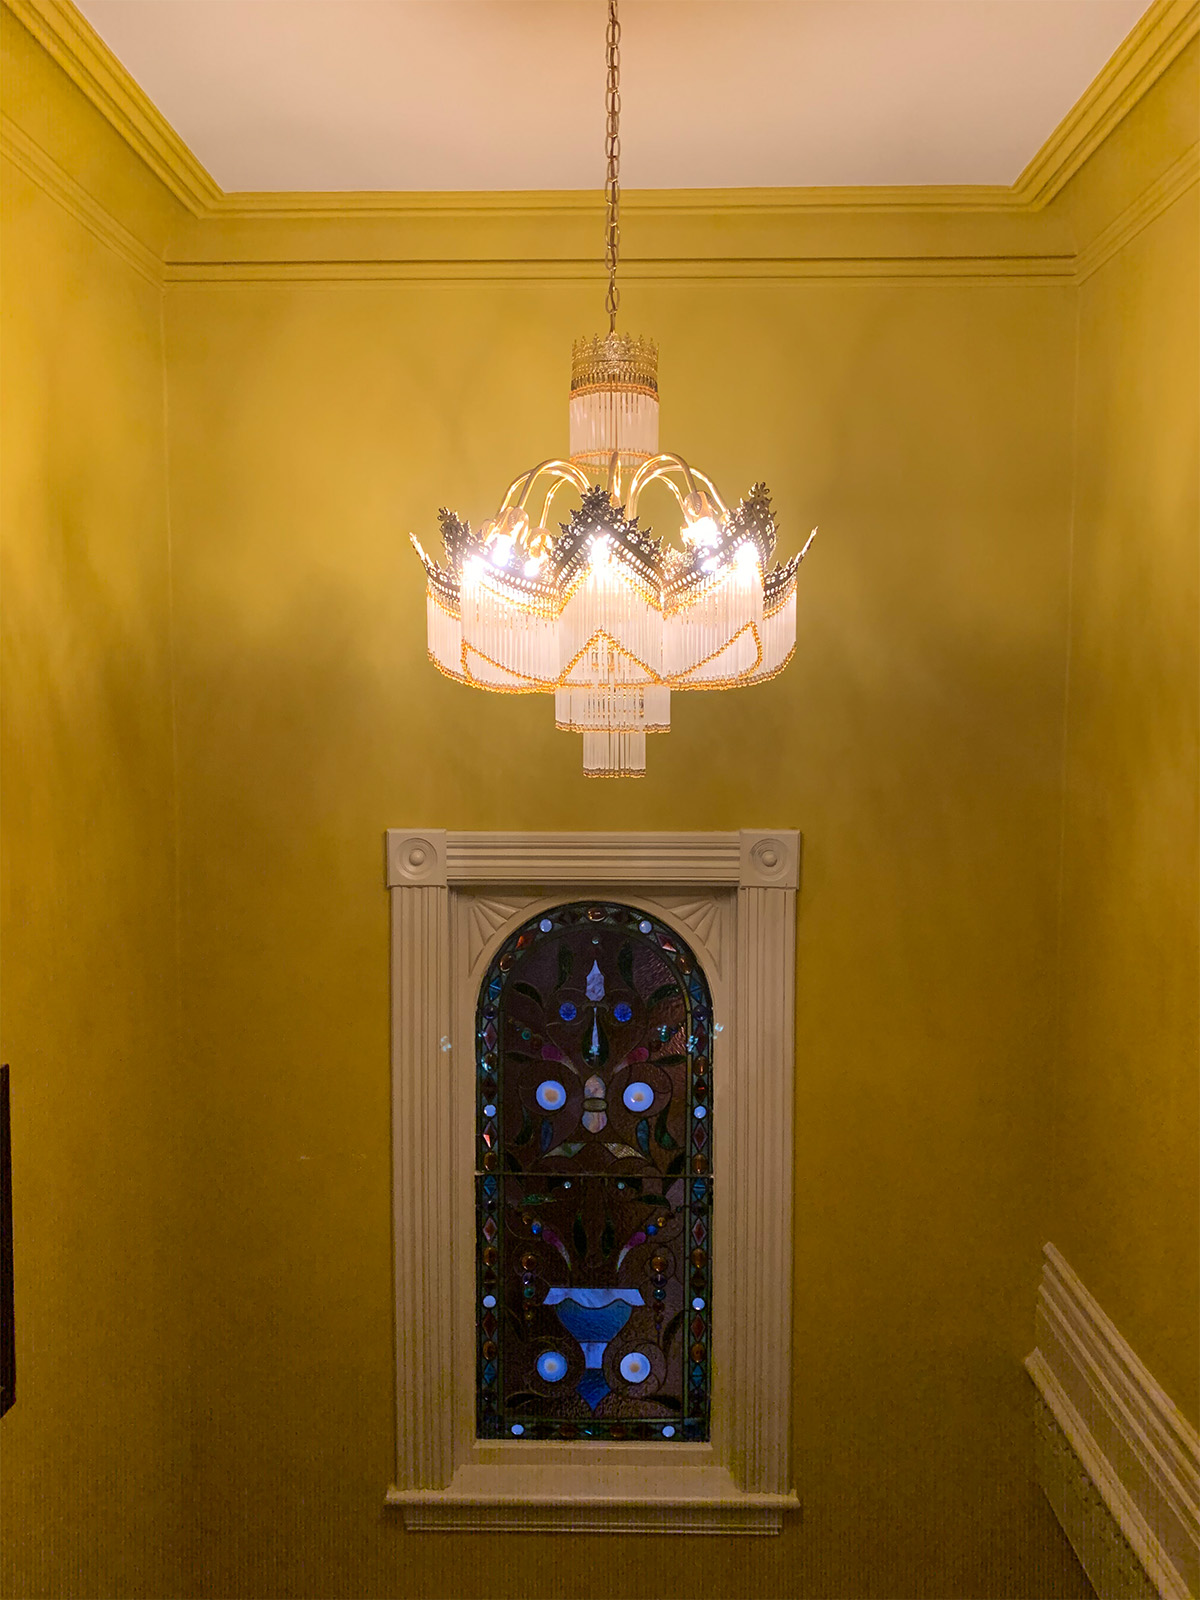 Expertly Restored Victorian Stained Glass Window & Chandelier